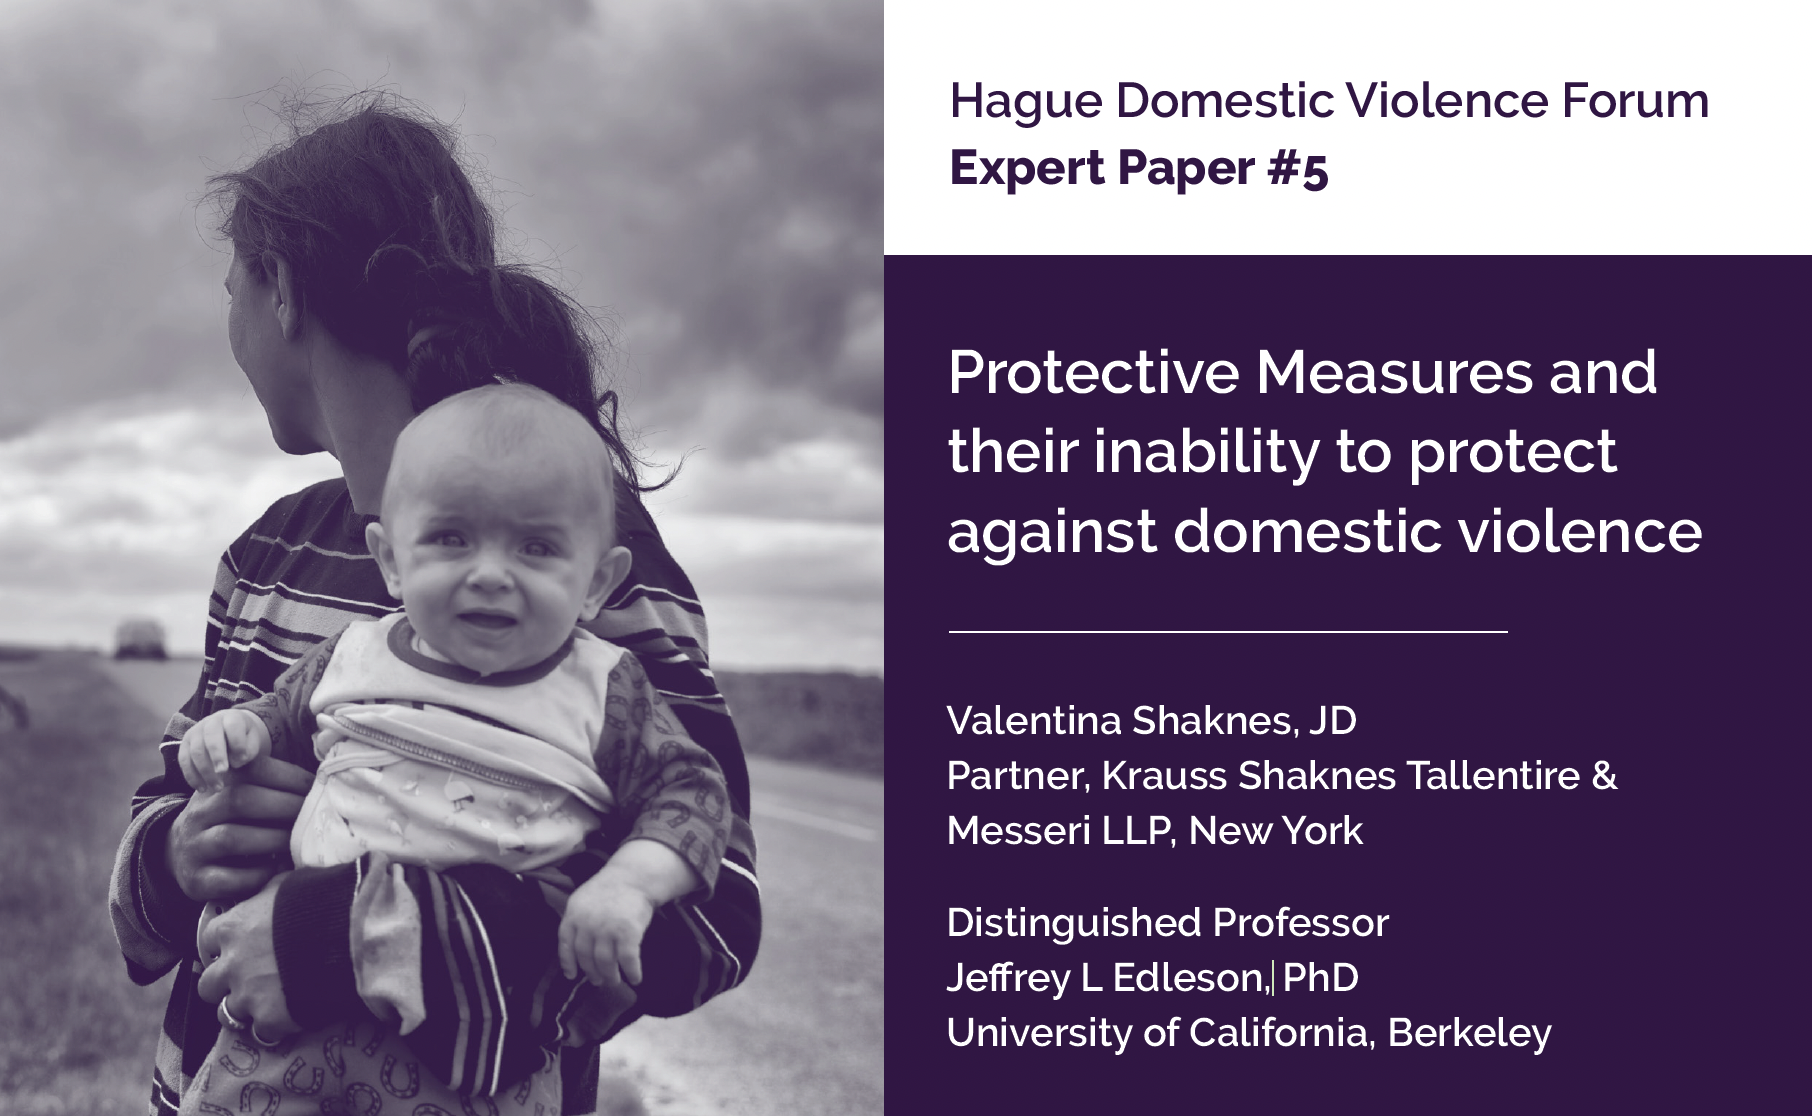 Expert Paper 5: Protective Measures and their inability to protect against domestic violence